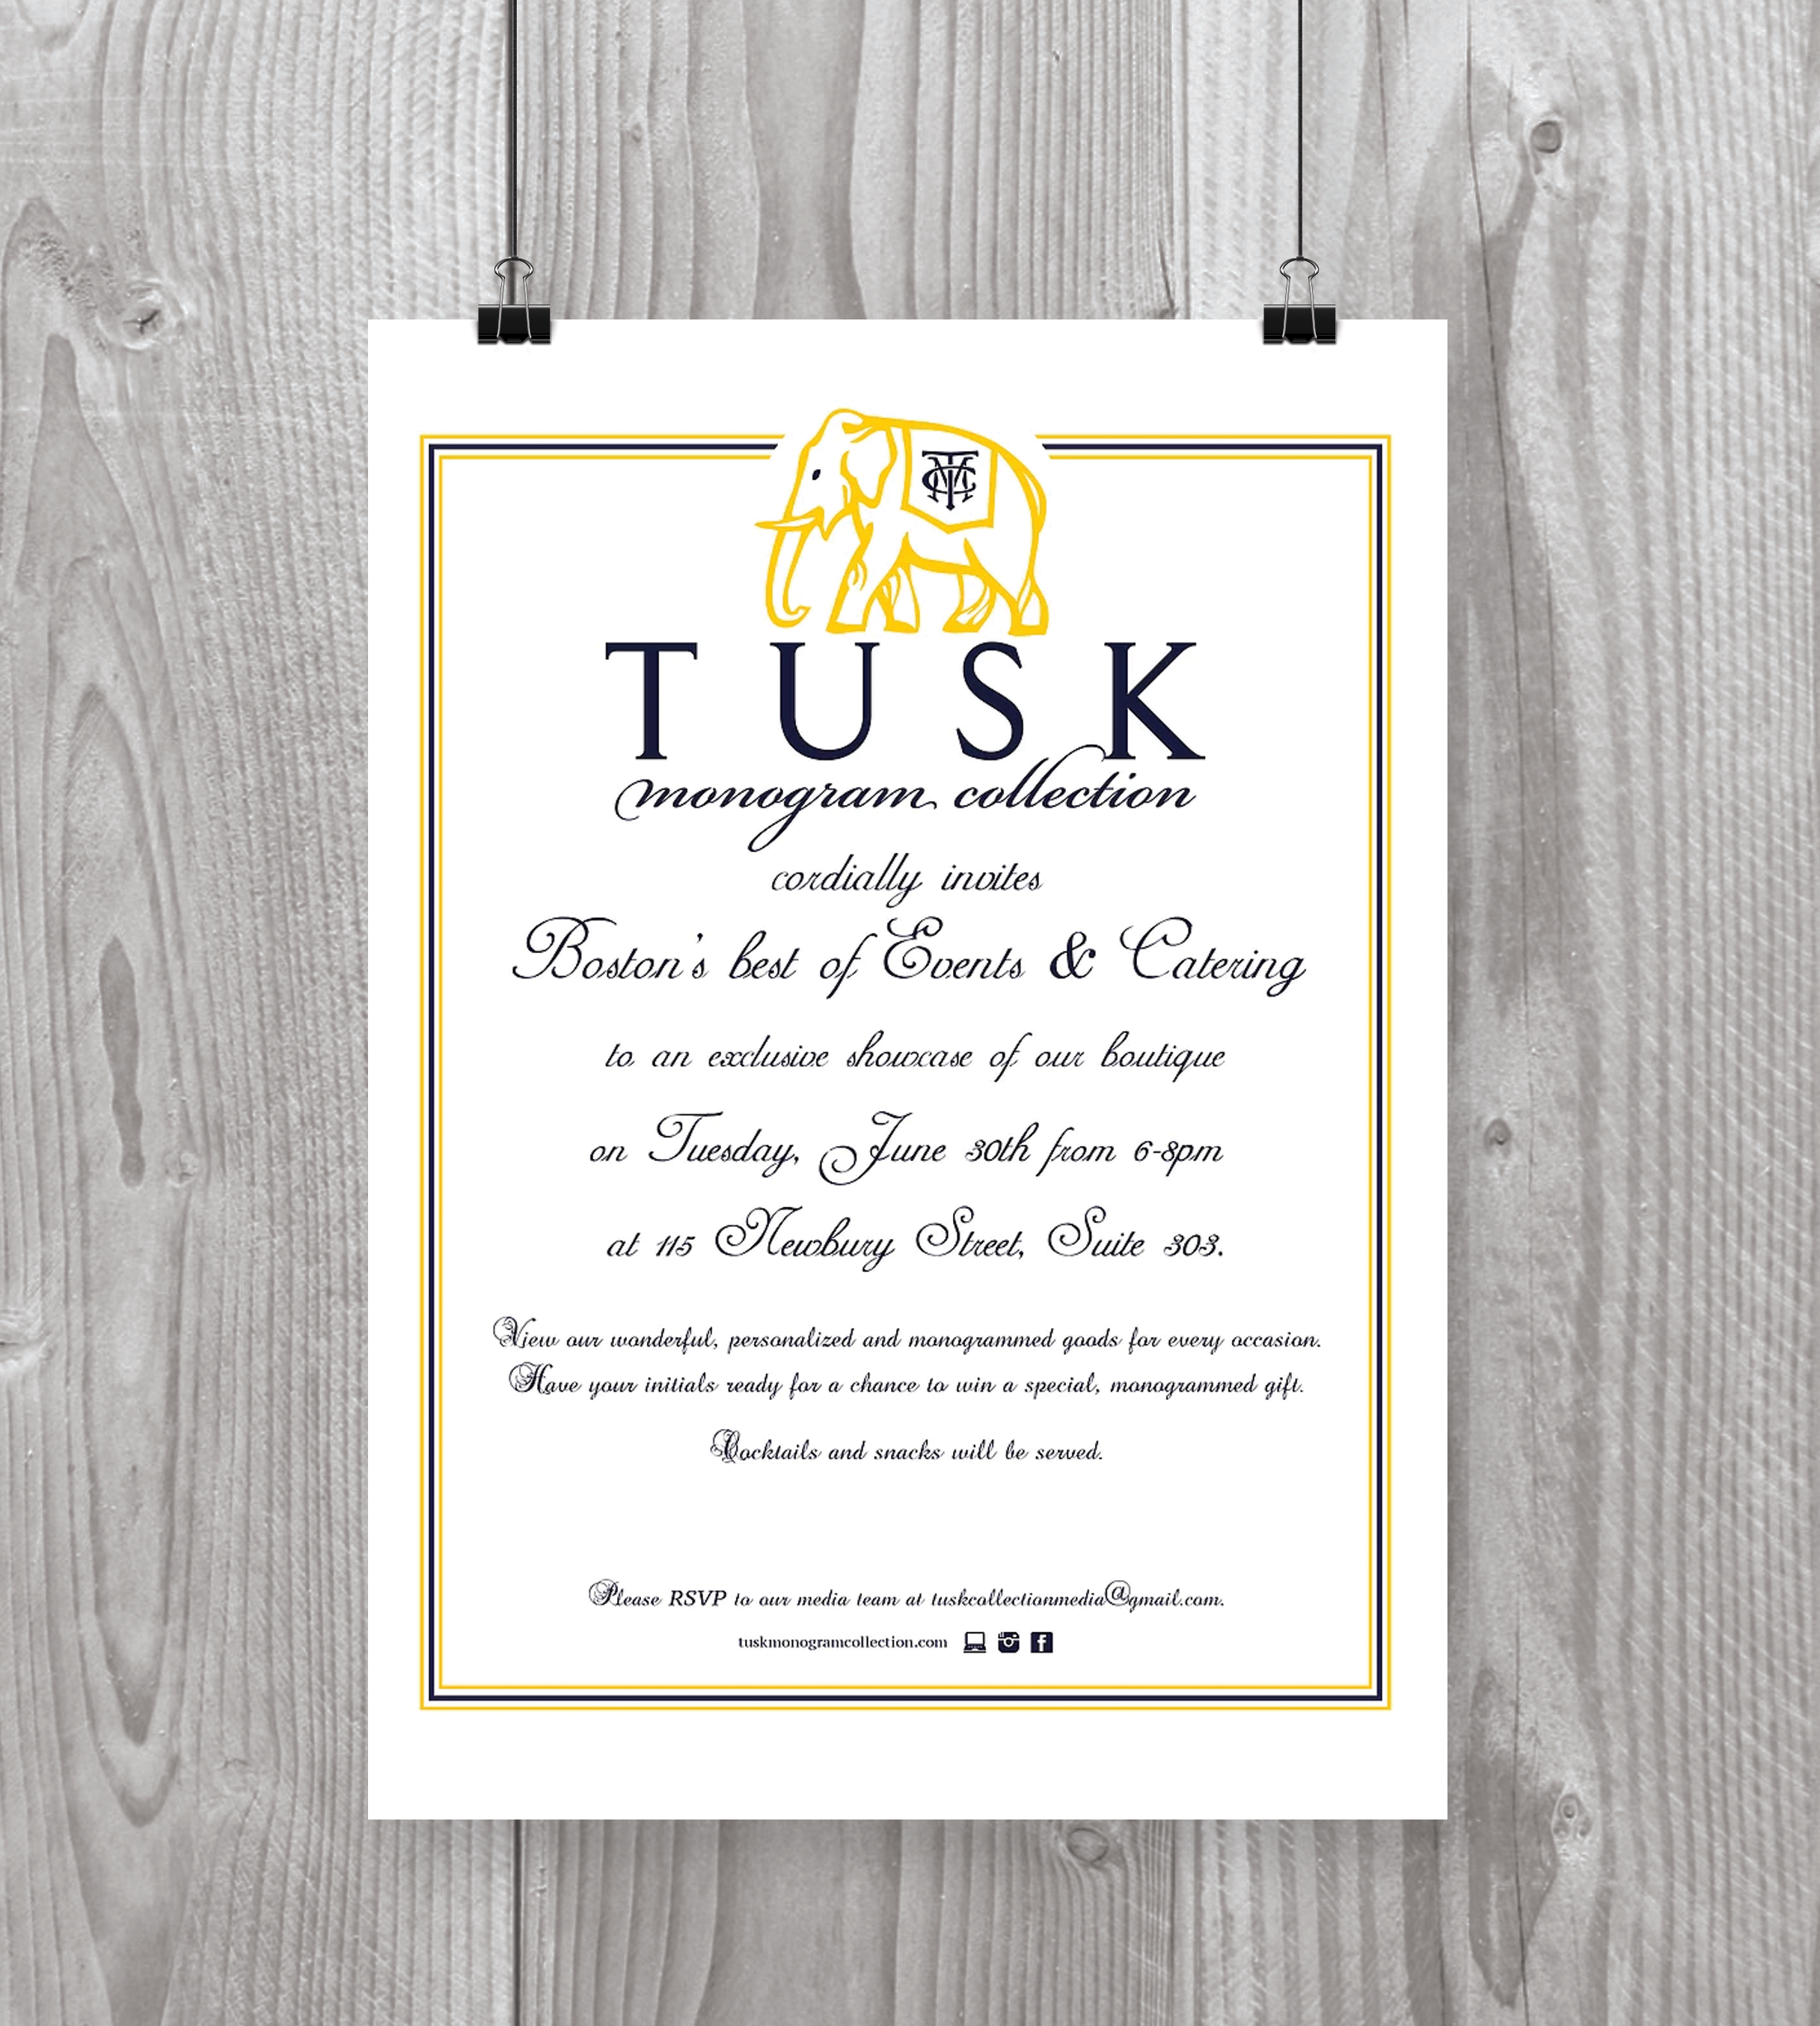 tusk-monogram-events.png